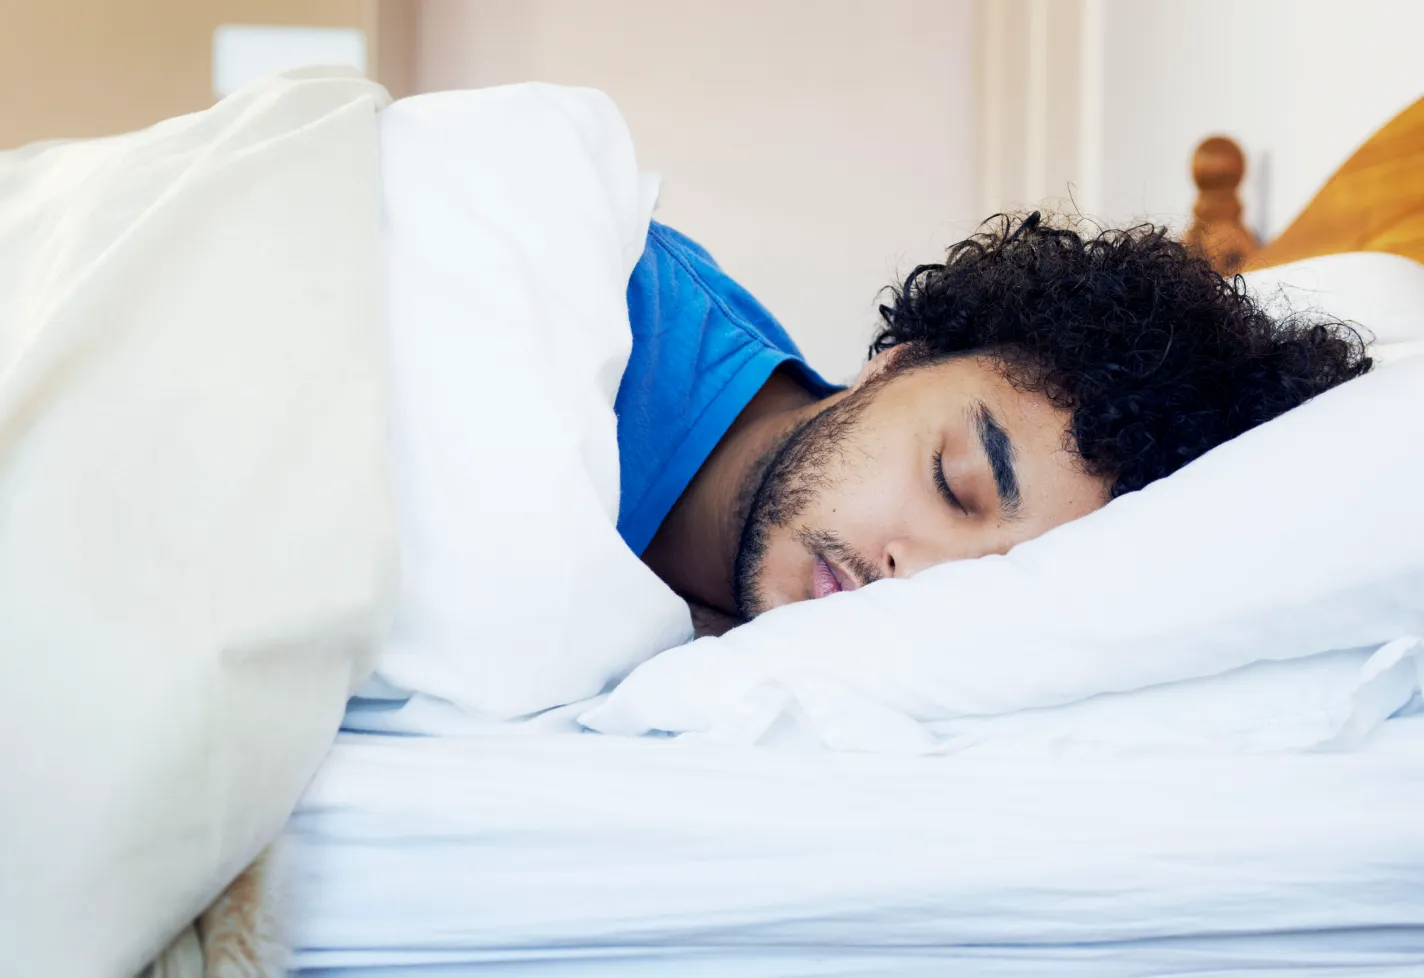 A man with curly hair sleeps in his bed.